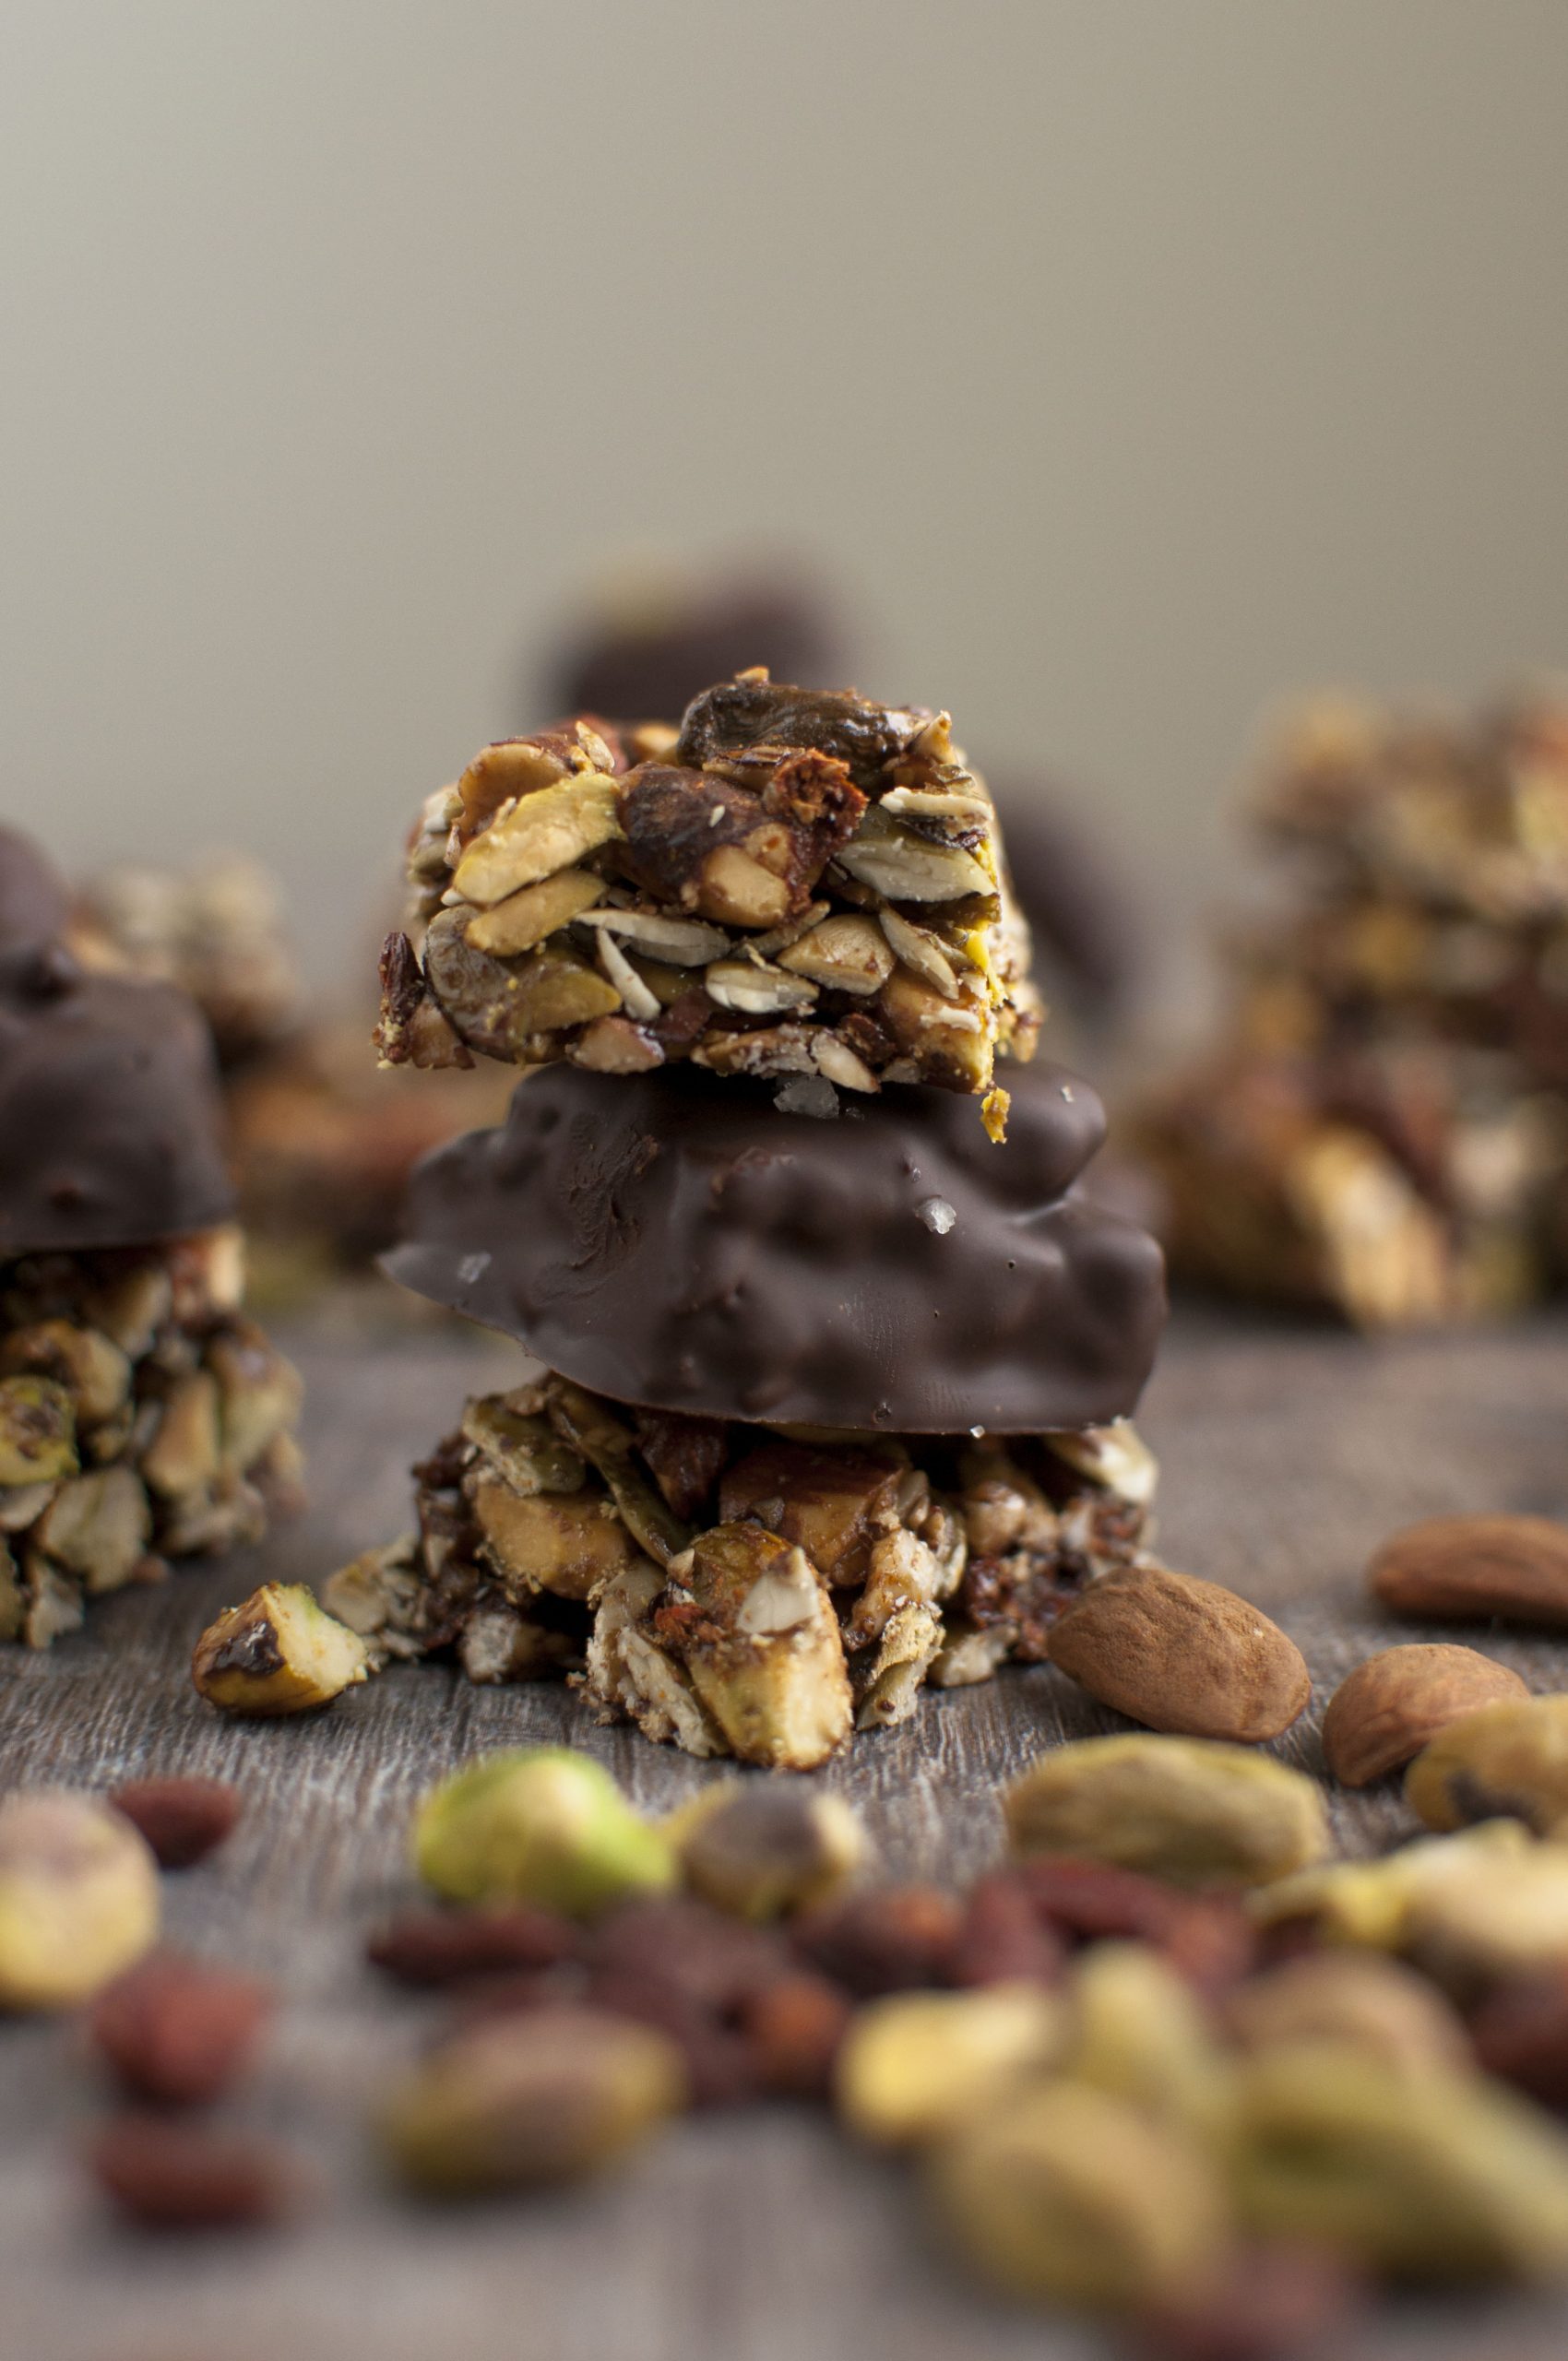 https://theorganicdietitian.com/wp-content/uploads/2015/12/Chocolate-Nut-Clusters-2-1-scaled.jpg